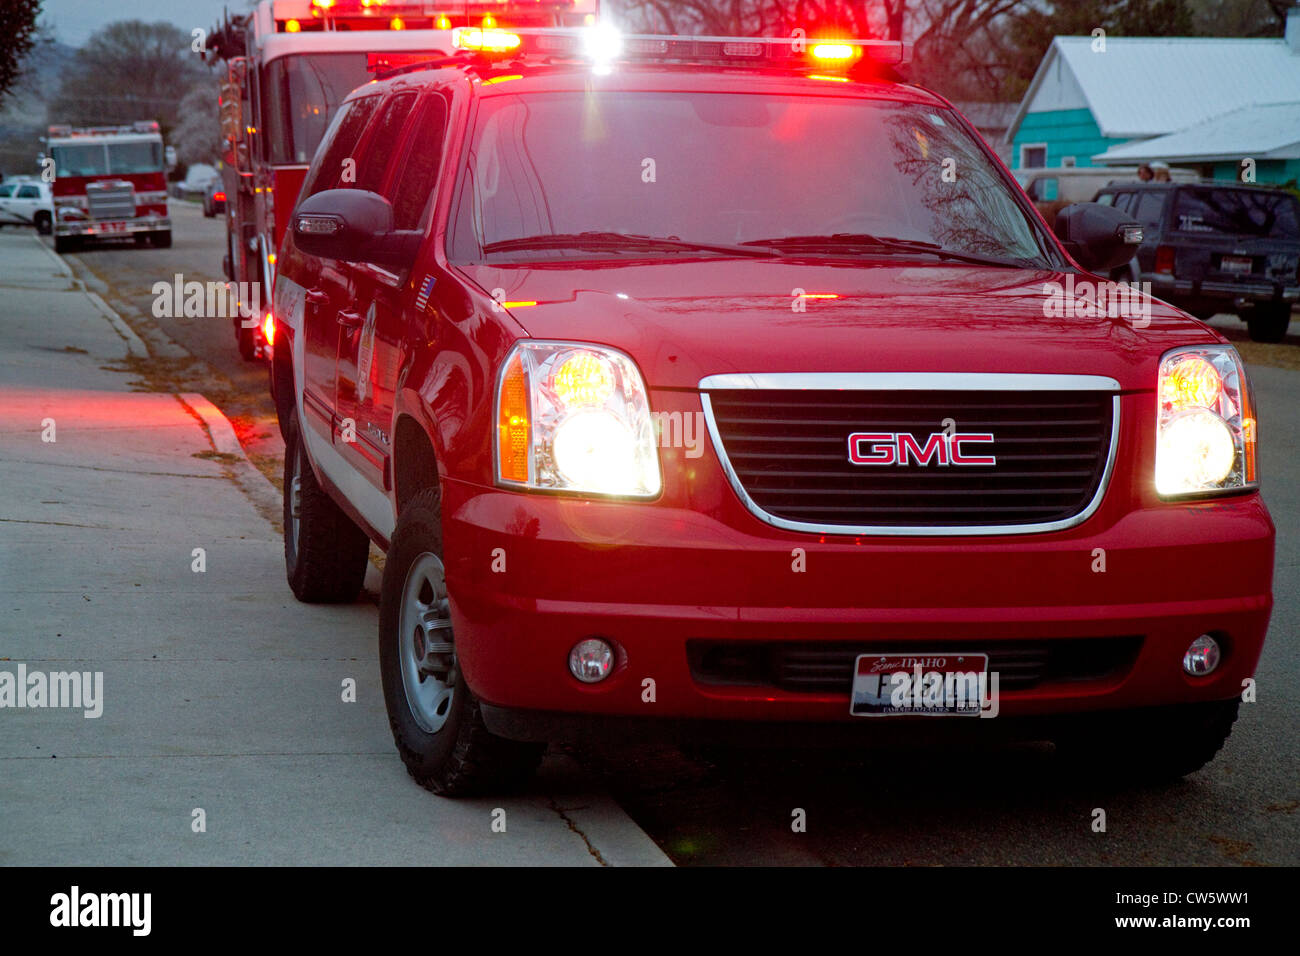 Fire command vehicle responds to an emergency in Boise, Idaho, USA. Stock Photo